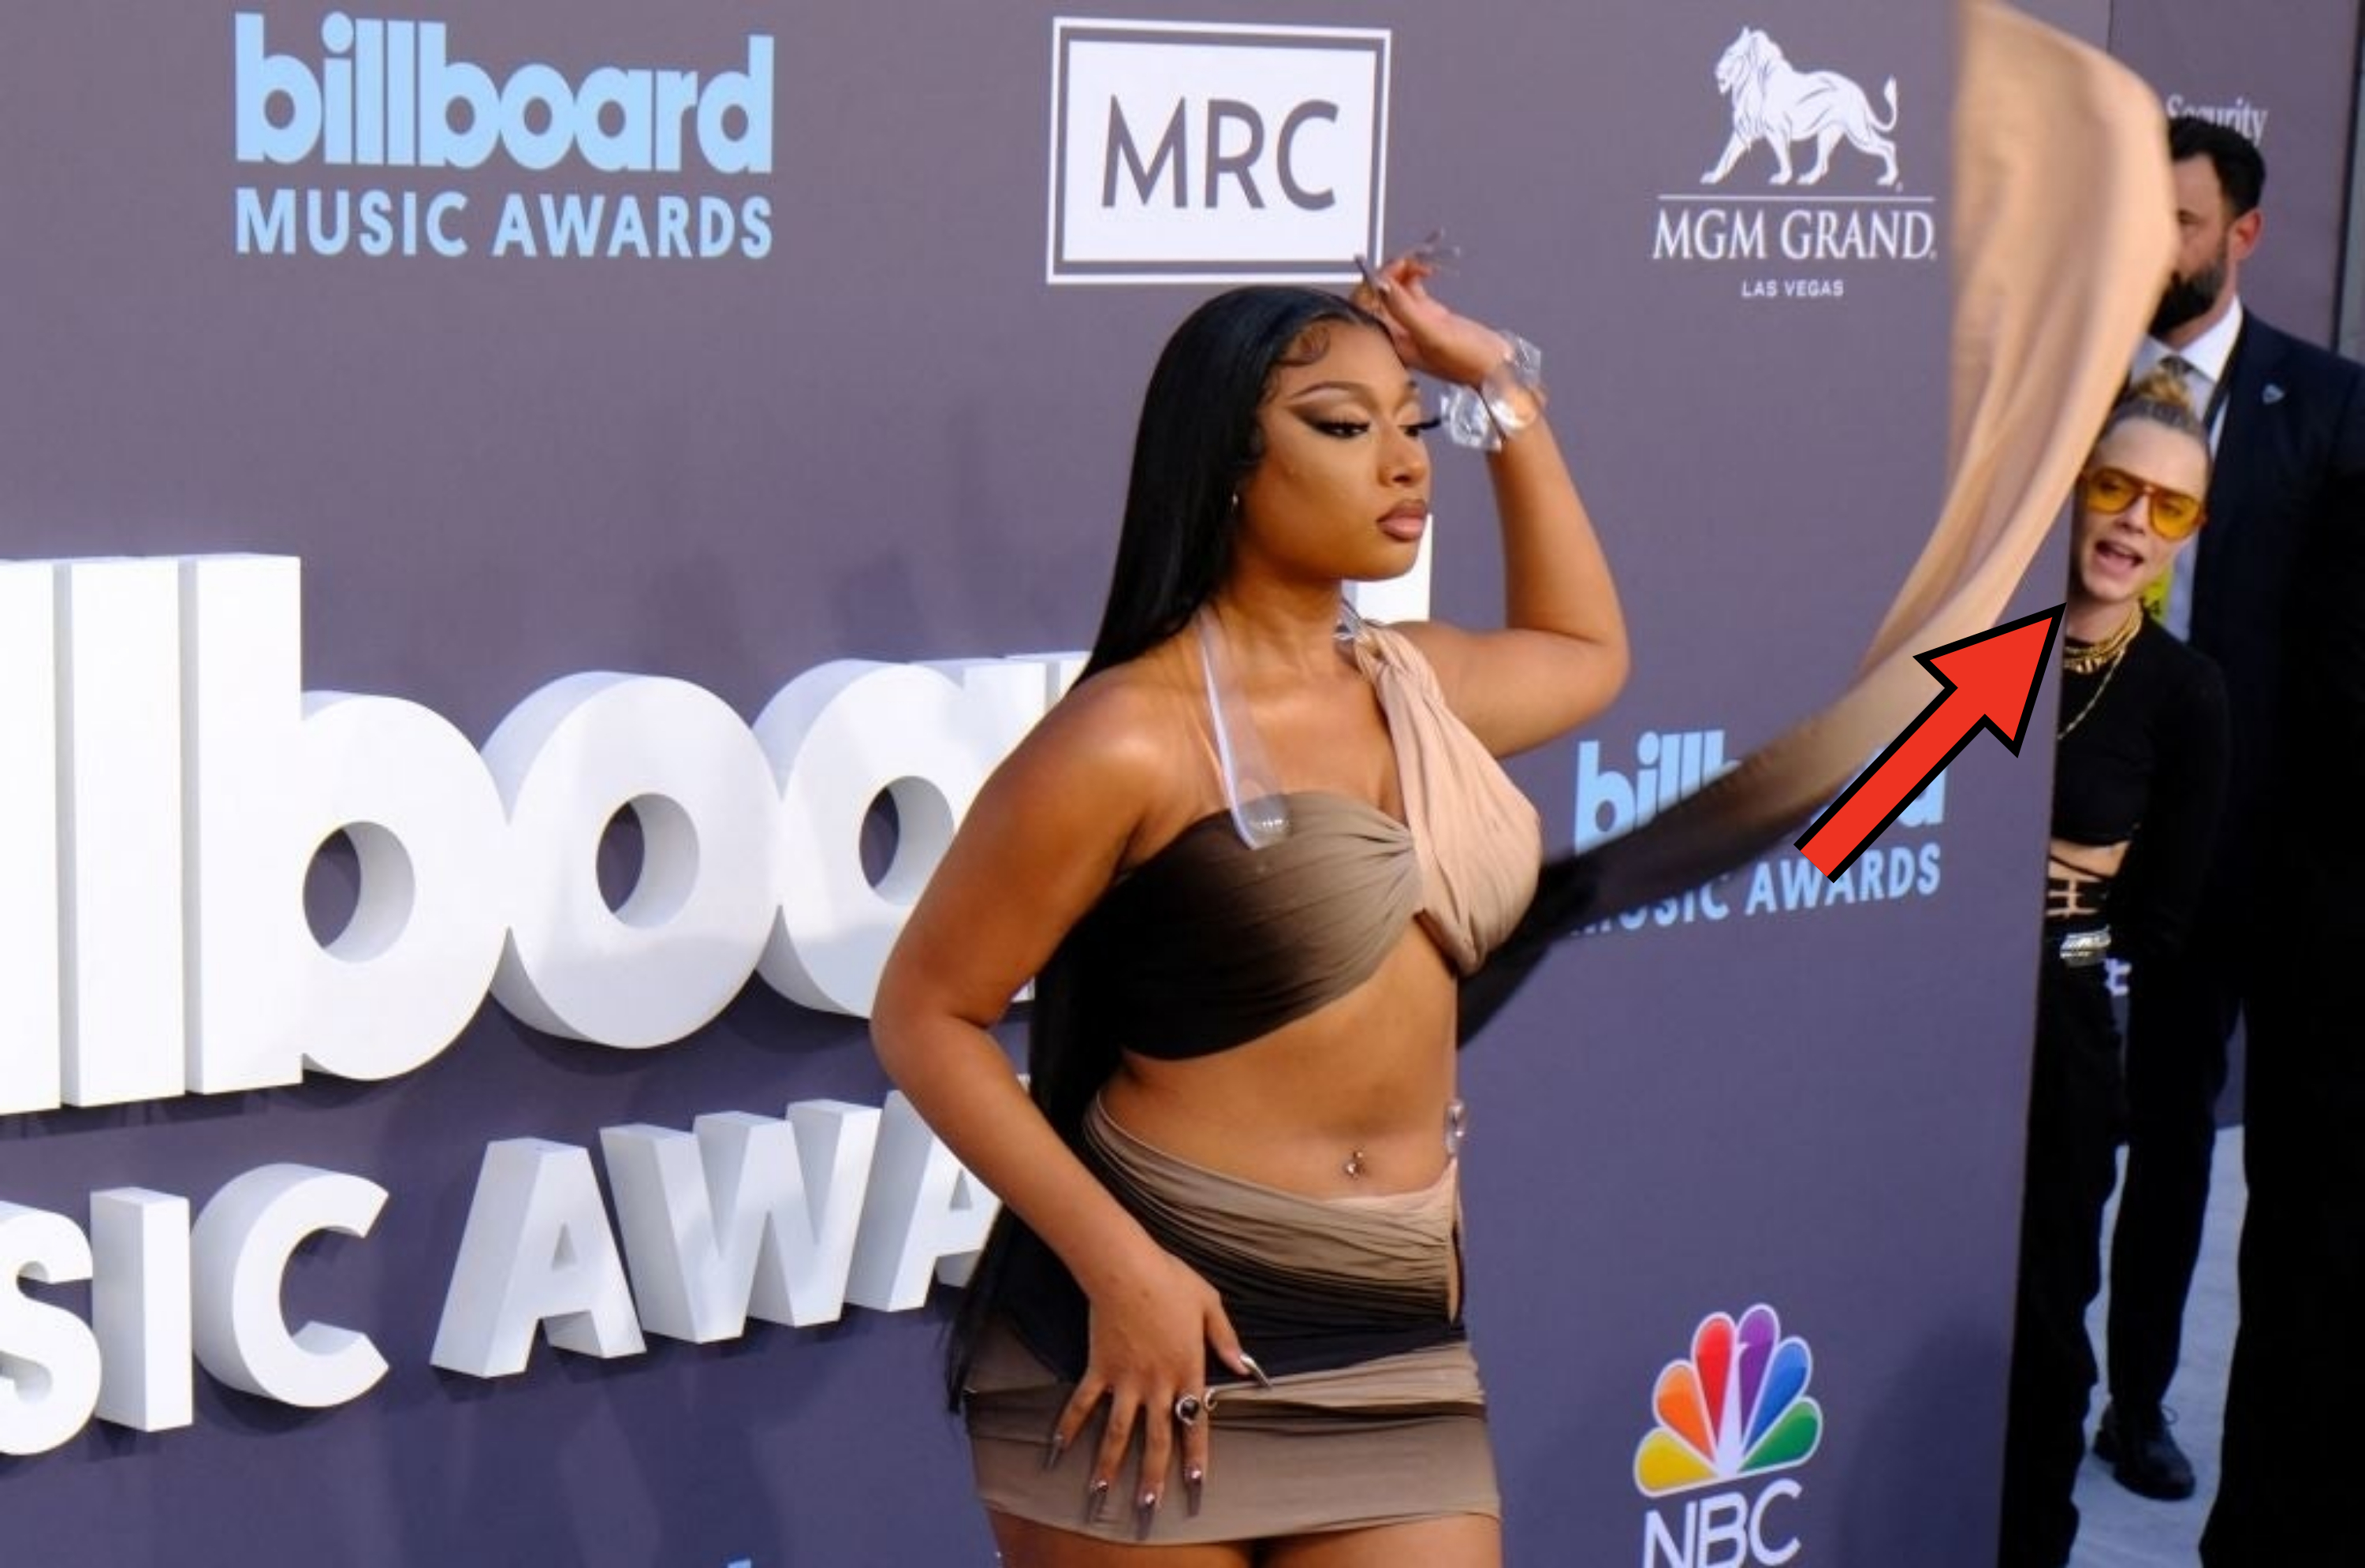 Megan Thee Stallion poses in a stylish asymmetrical dress at the Billboard Music Awards, with cara hiding behind her